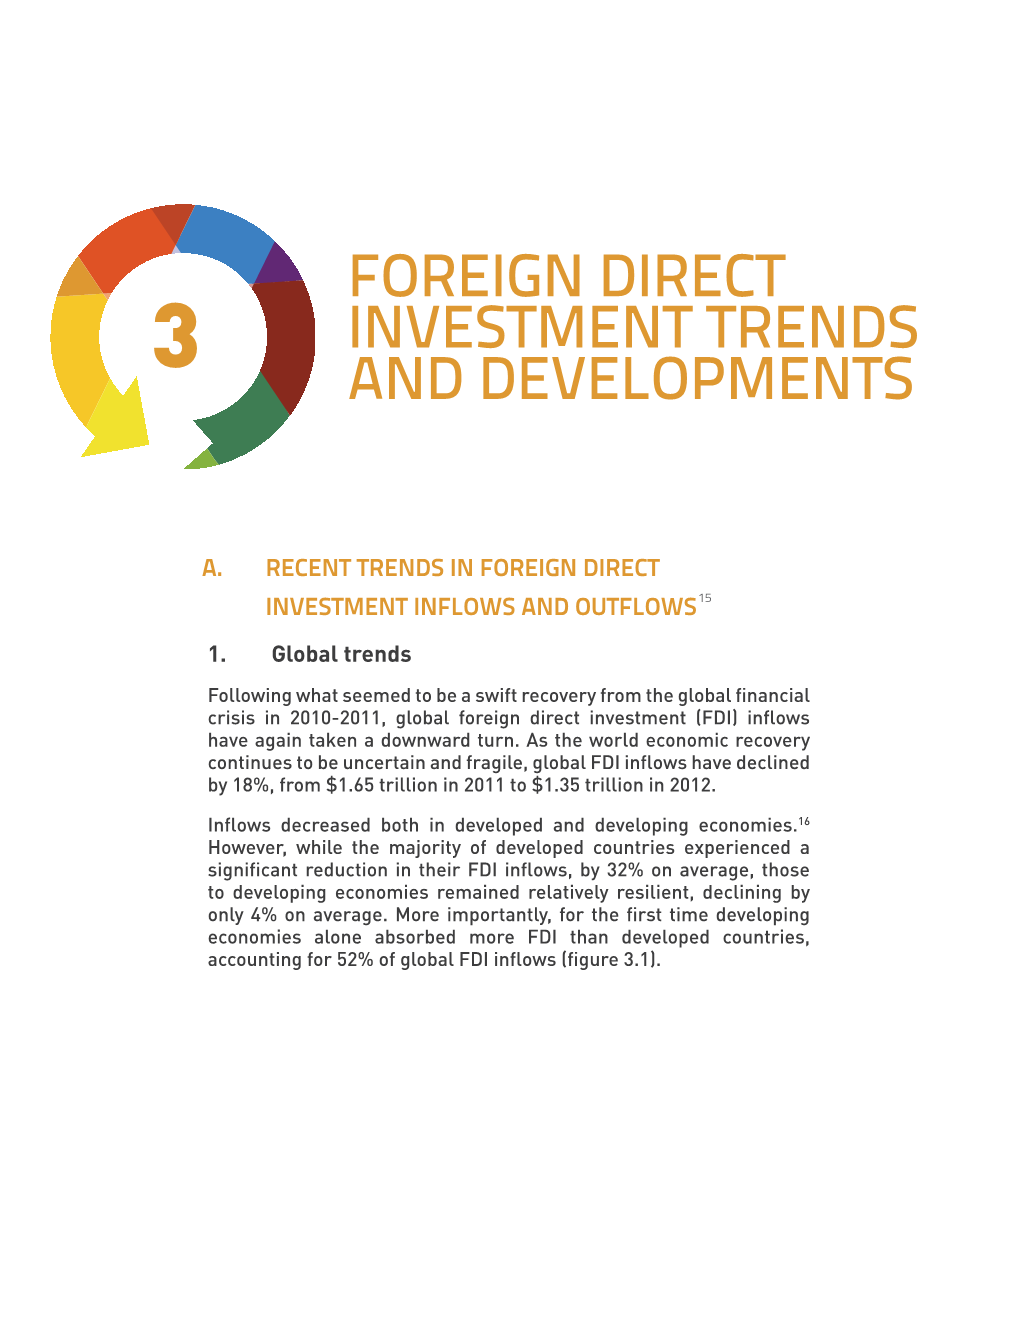 Foreign Direct Investment Trends and Developments